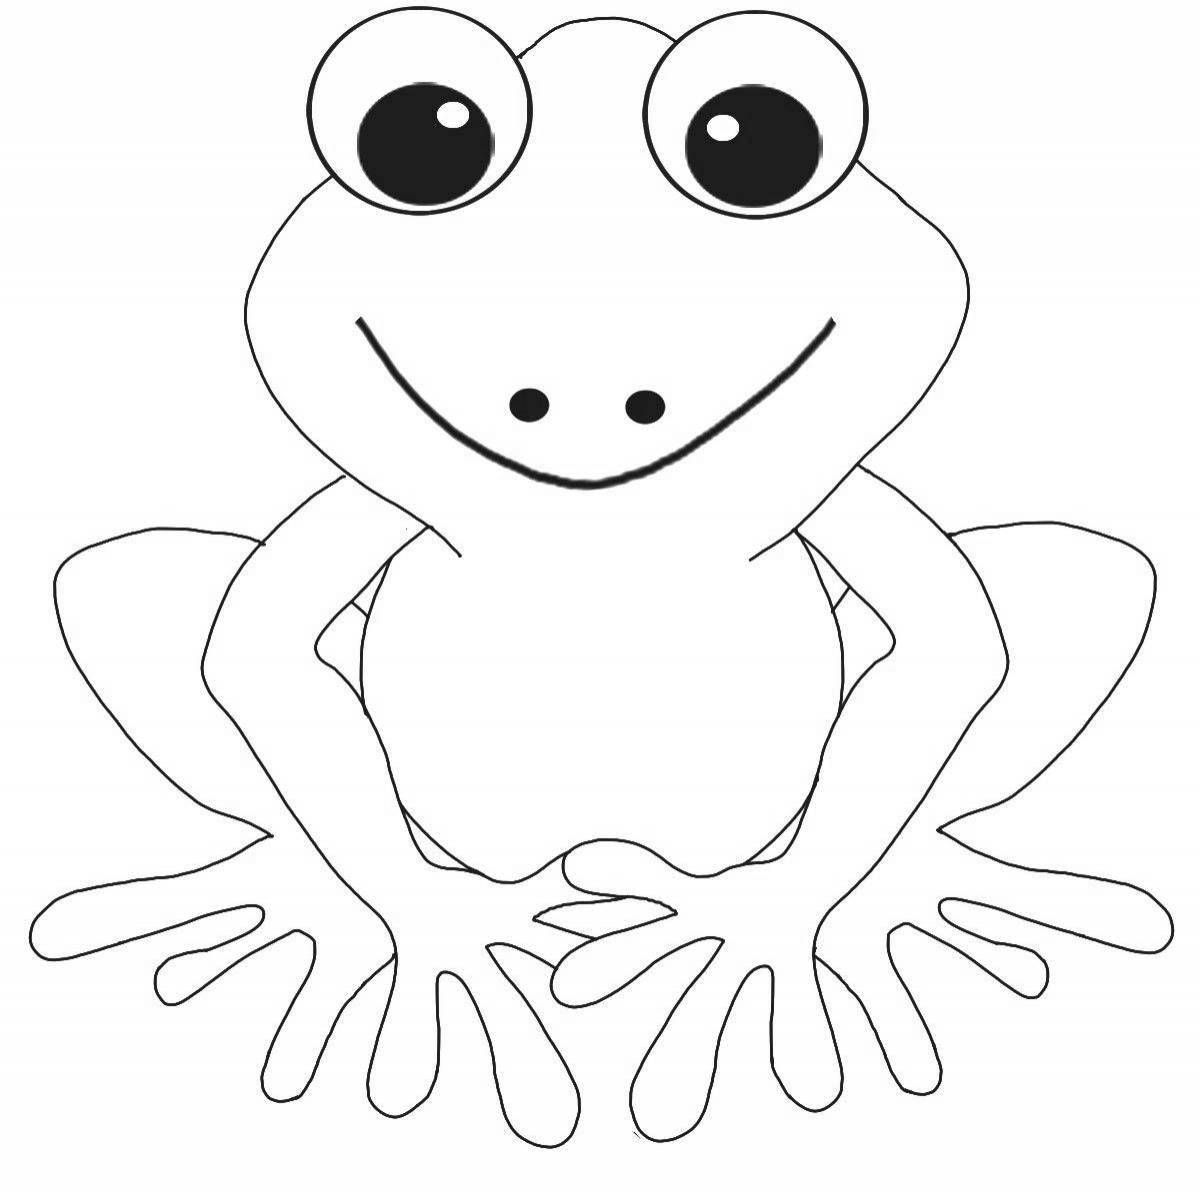 Awesome frog coloring book